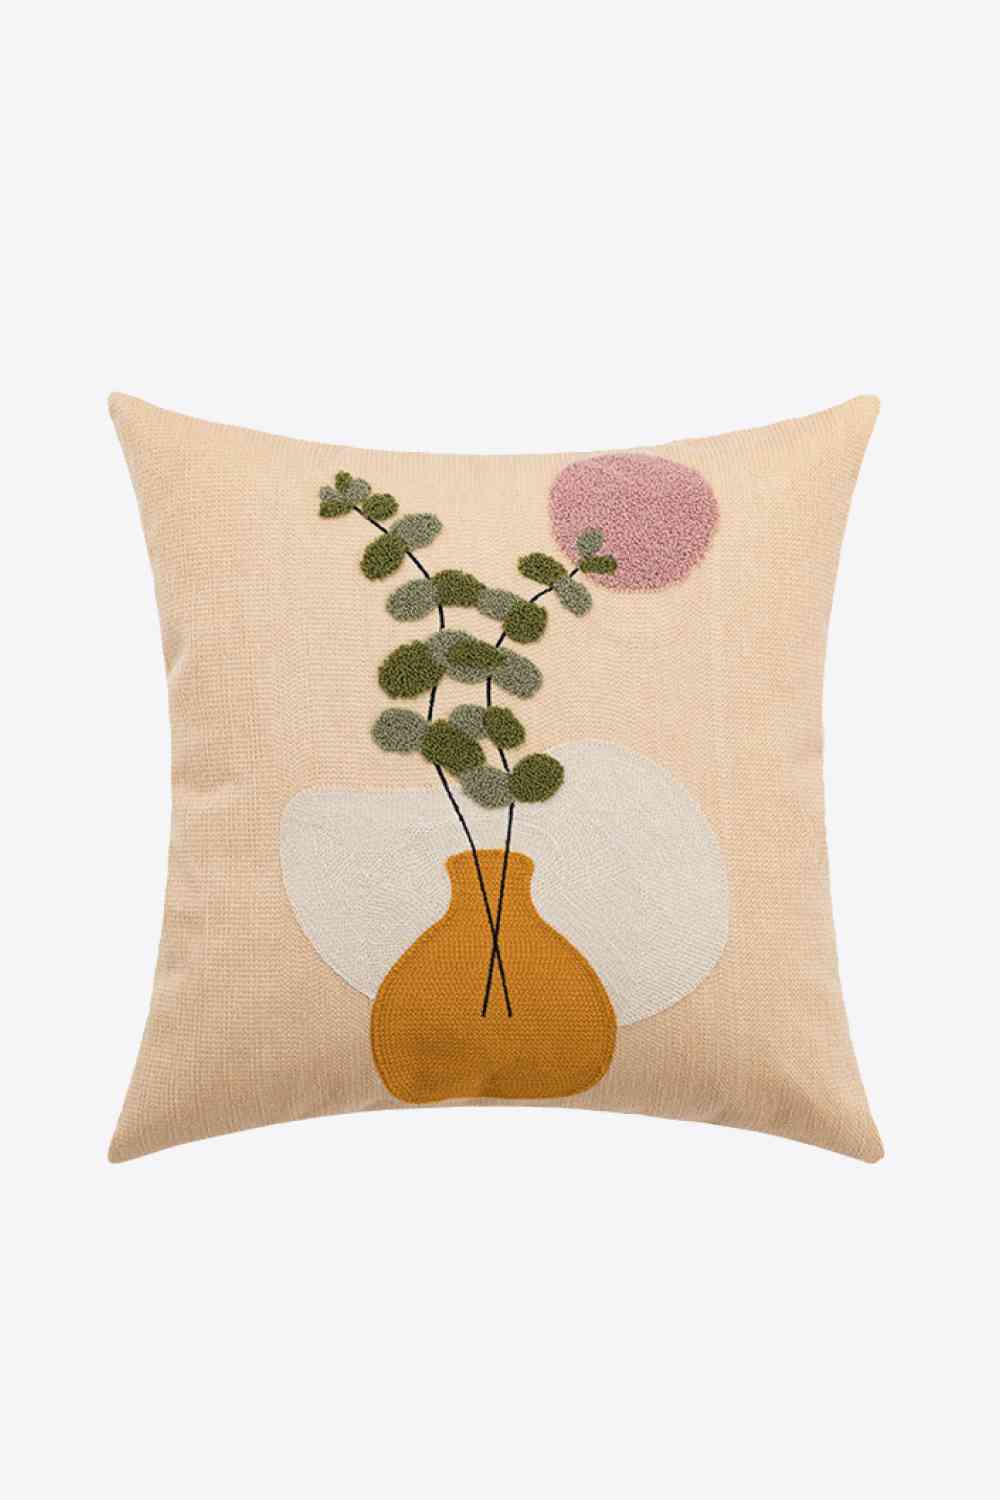 Embroidered Square Decorative Throw Pillow Case - Decorative Pillowcases - Tophatter's Smashing Daily Deals | We're Against Forced Labor in China